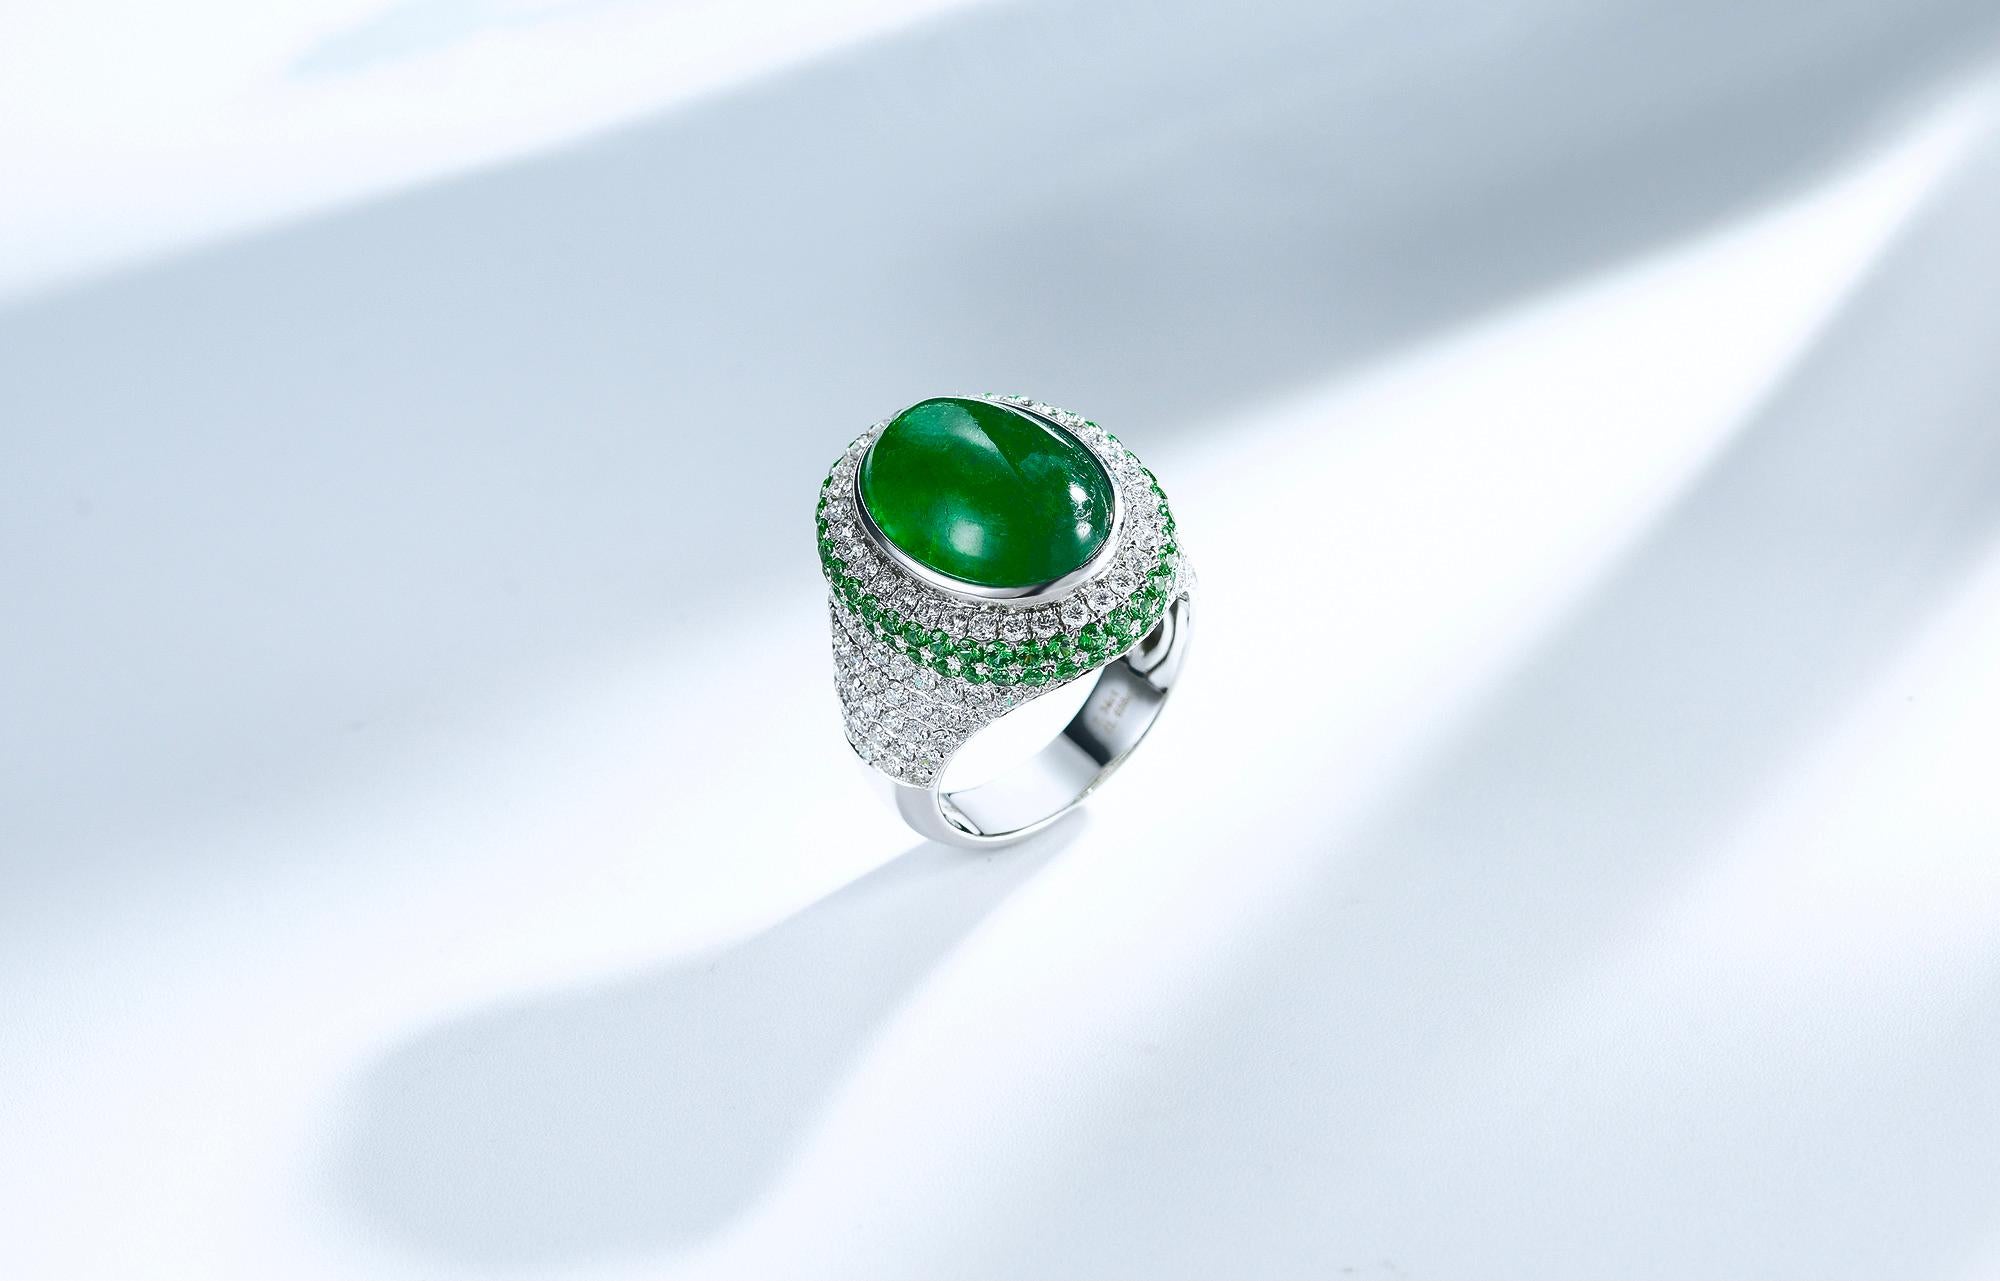 This is a massive statement piece with a 7.34ct Emerald cabochon. The emerald is surrounded by Diamonds and Tsavorite pave, the pave covers half of the ring starting from the top where the Emerald is through to the belly of the ring. It can be wore